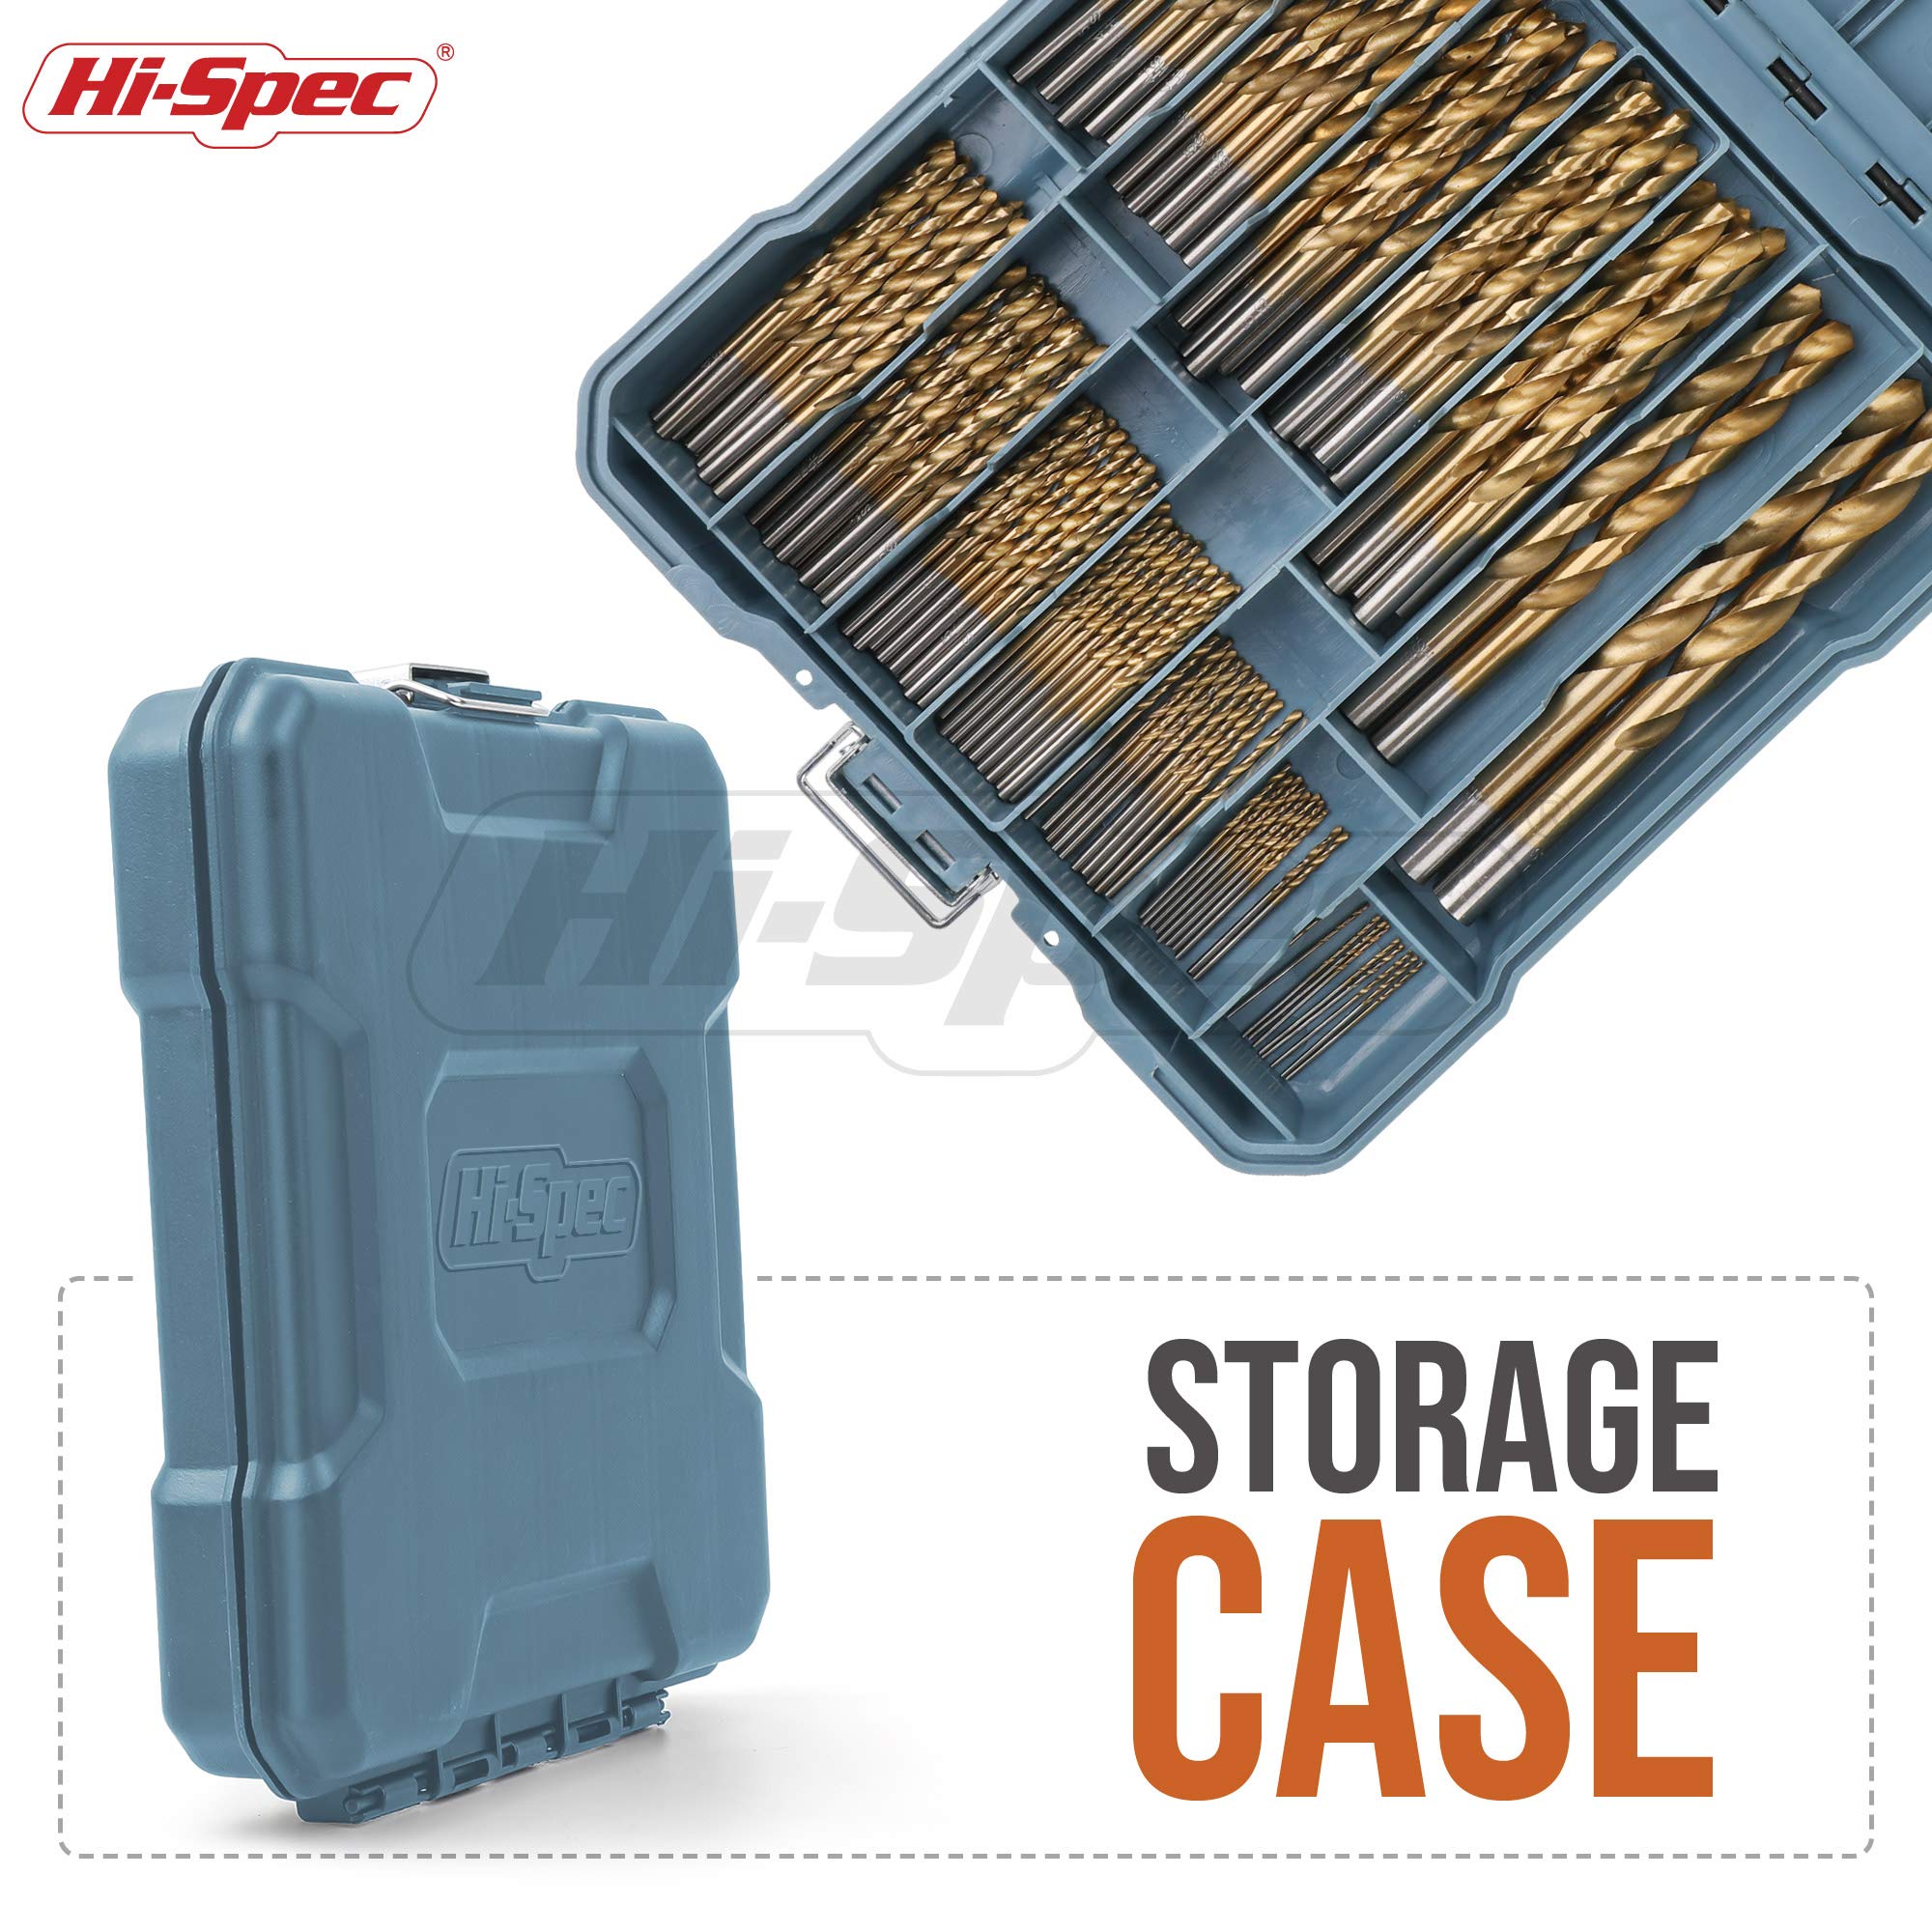 Hi-Spec 99 Piece SAE Multi Drill Bit Set. 14 Sizes from 1/16in to 3/8in. Metal, Wood, Drywall & Plastics Drilling with HSS Titanium Steel Bits. Complete in a Tray Case